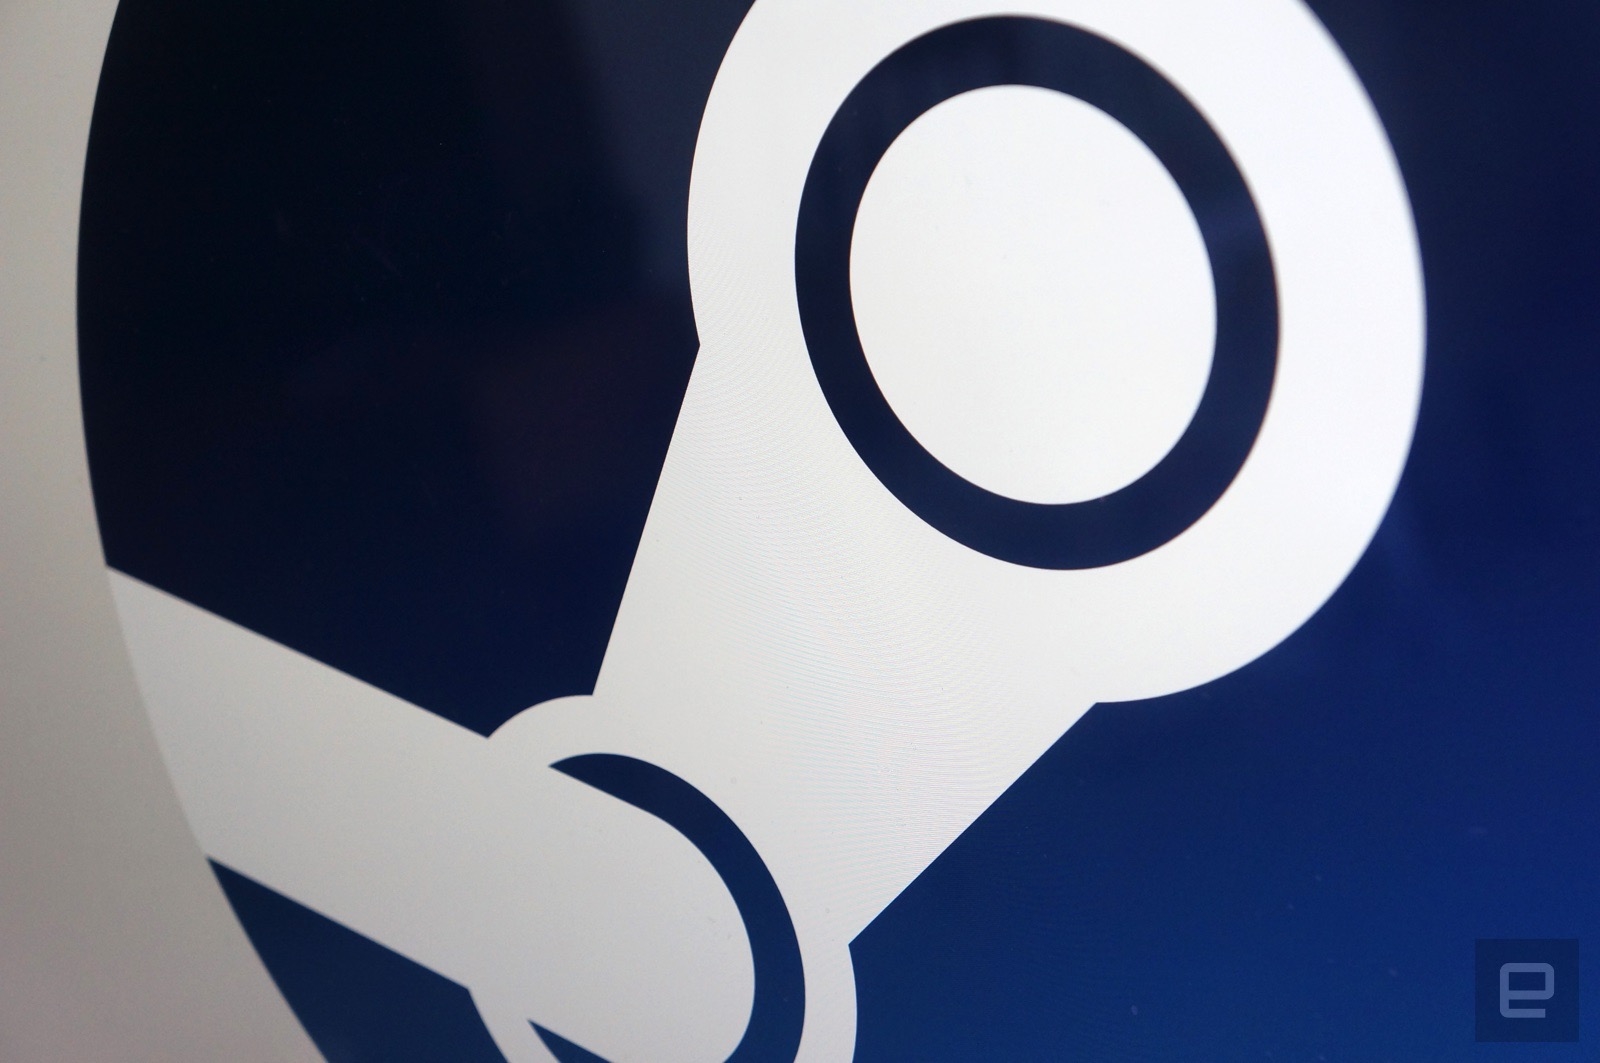 EU fines Valve and major game publishers for geo-blocking titles | DeviceDaily.com